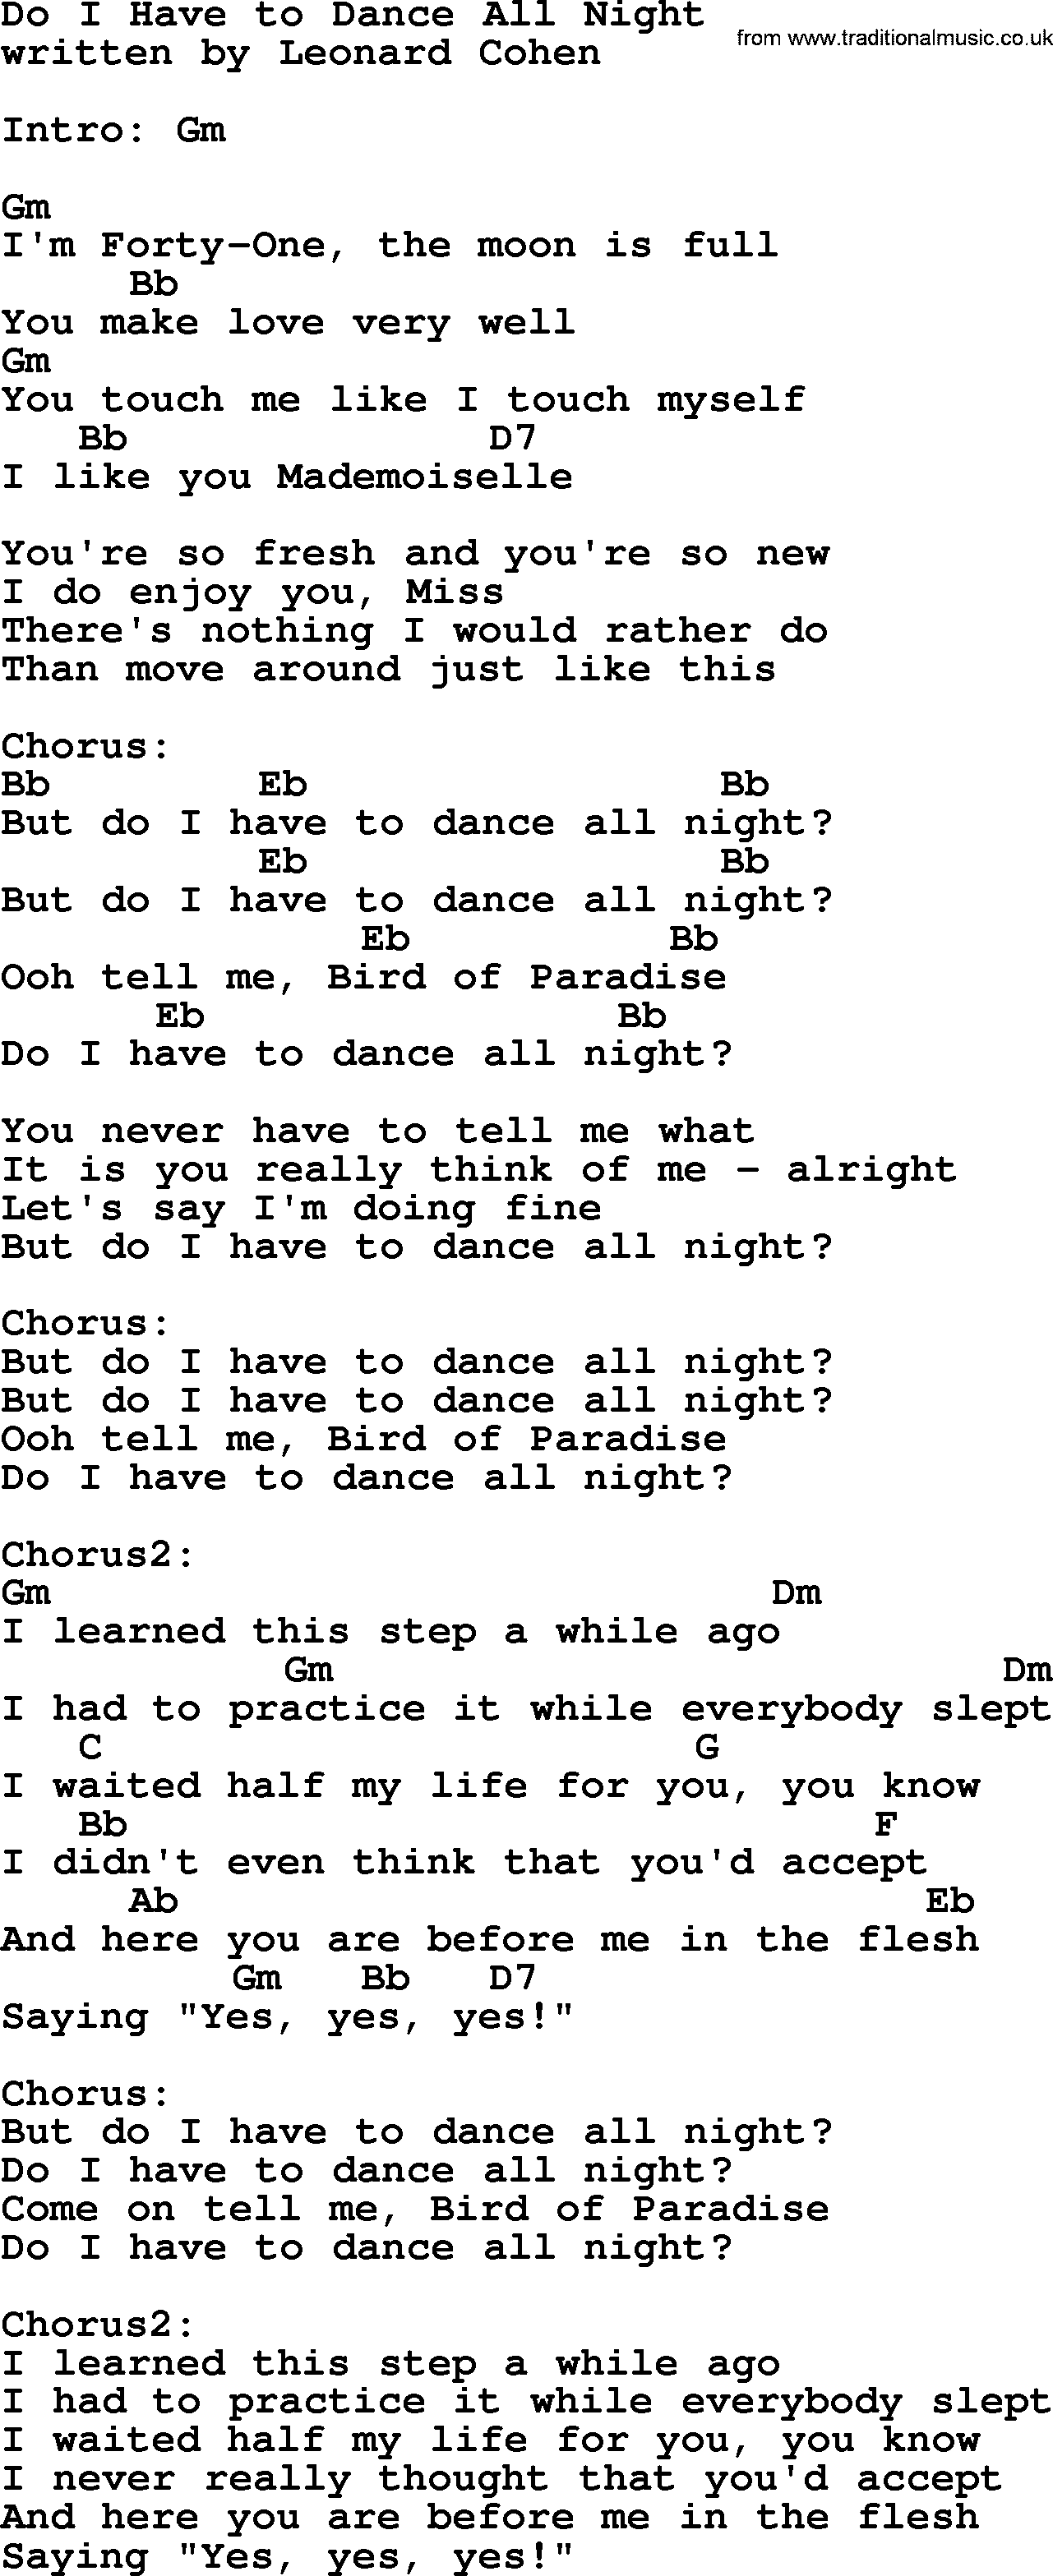 Leonard Cohen song Do I Have To Dance All Night, lyrics and chords